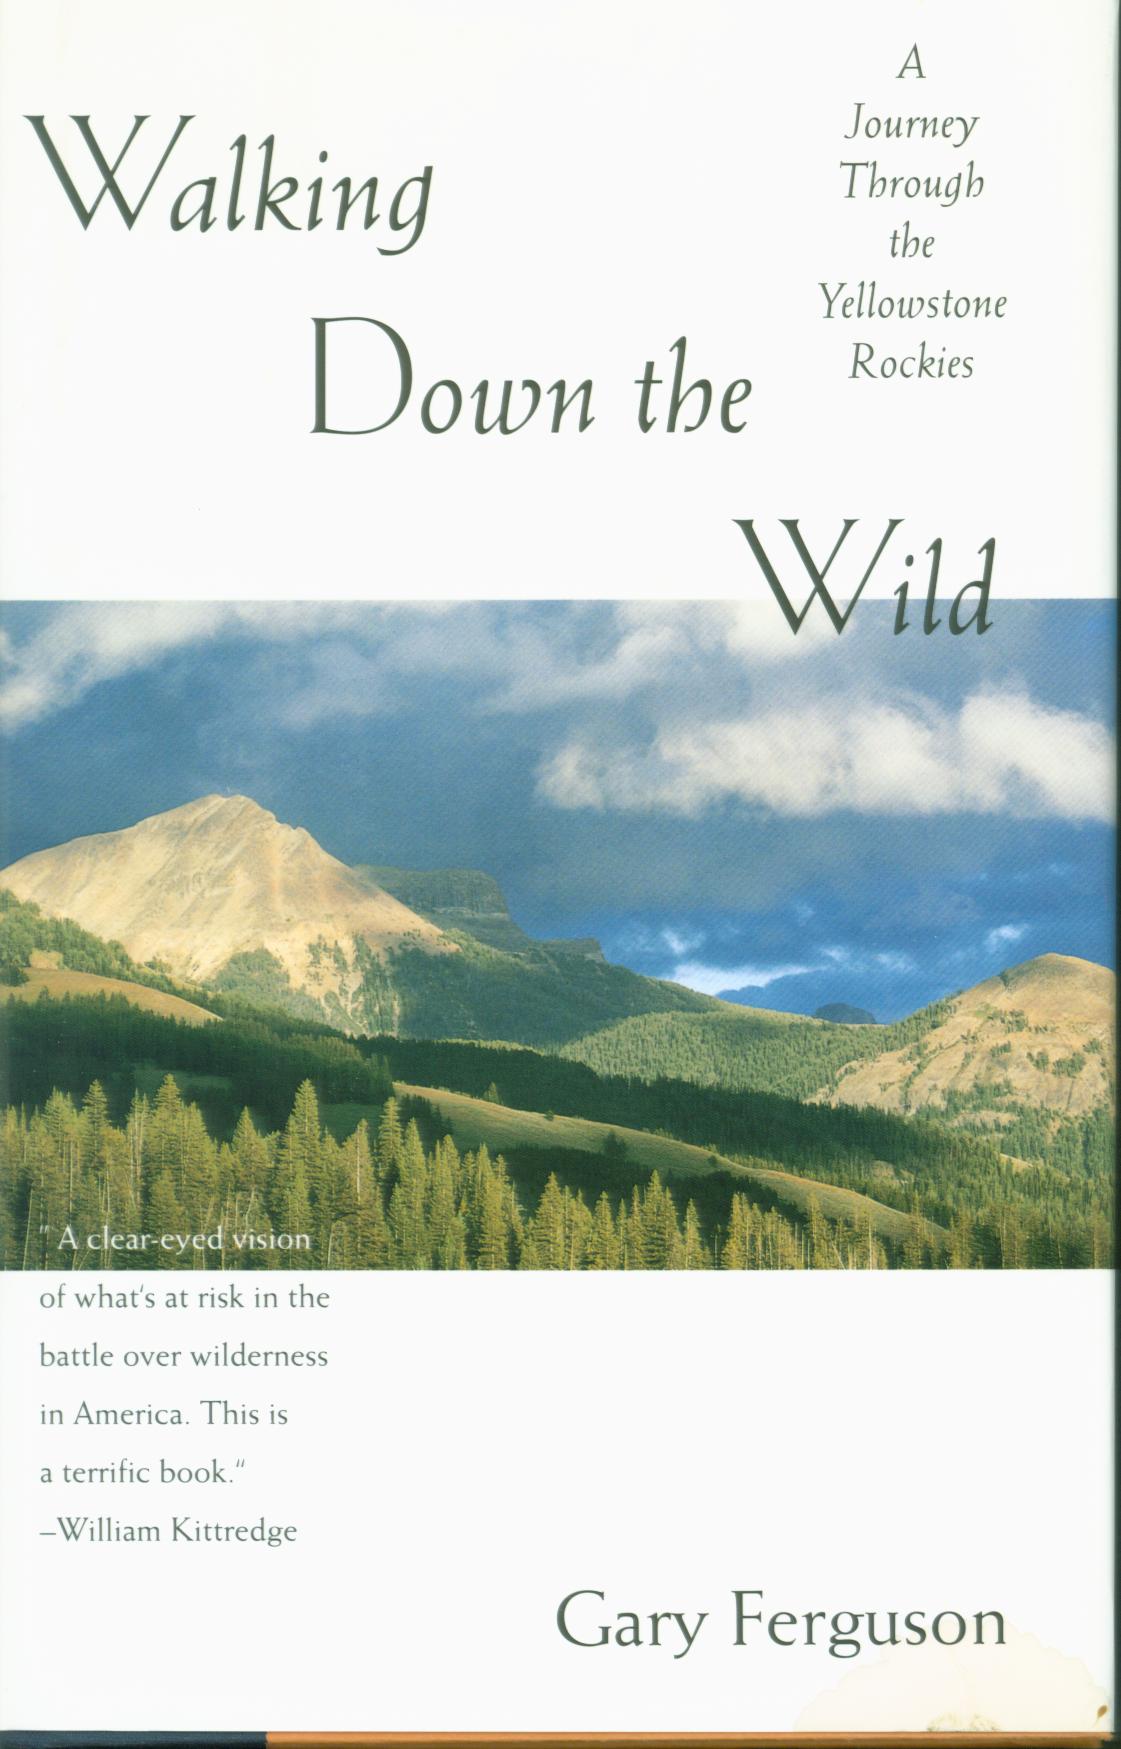 WALKING DOWN THE WILD: a journey through the Yellowstone Rockies.